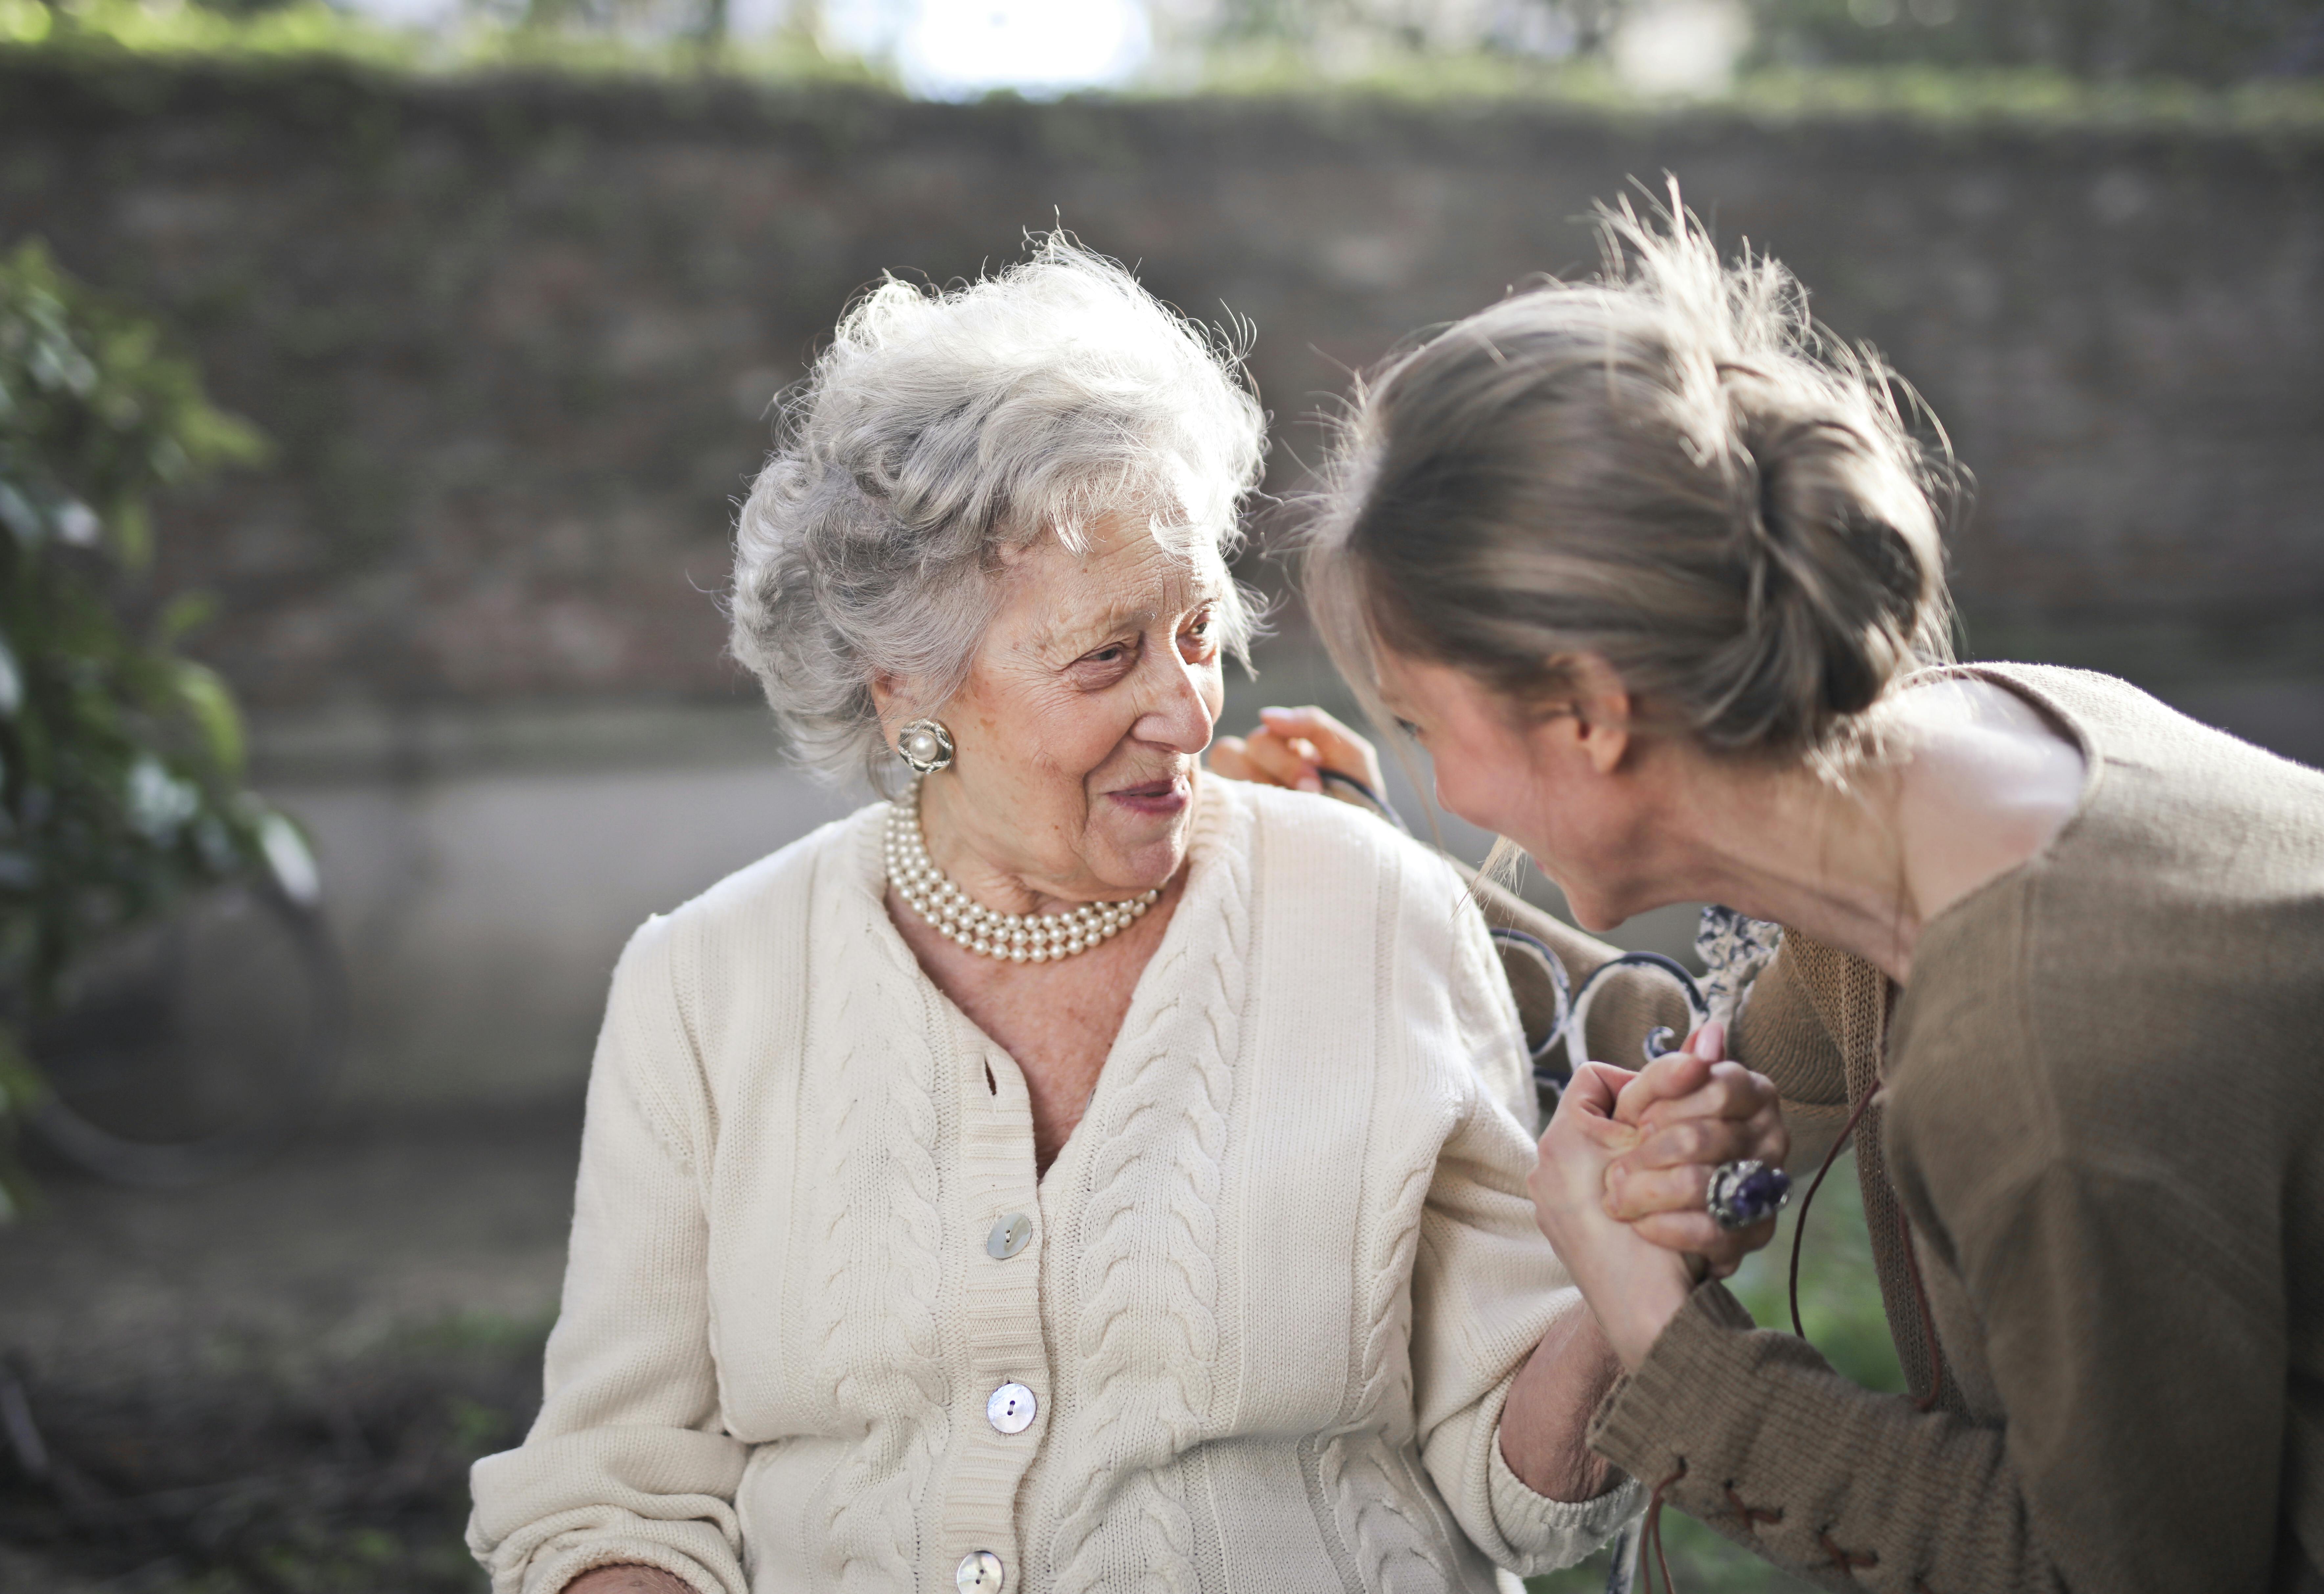 A younger woman talking to an older one | Source: Pexels